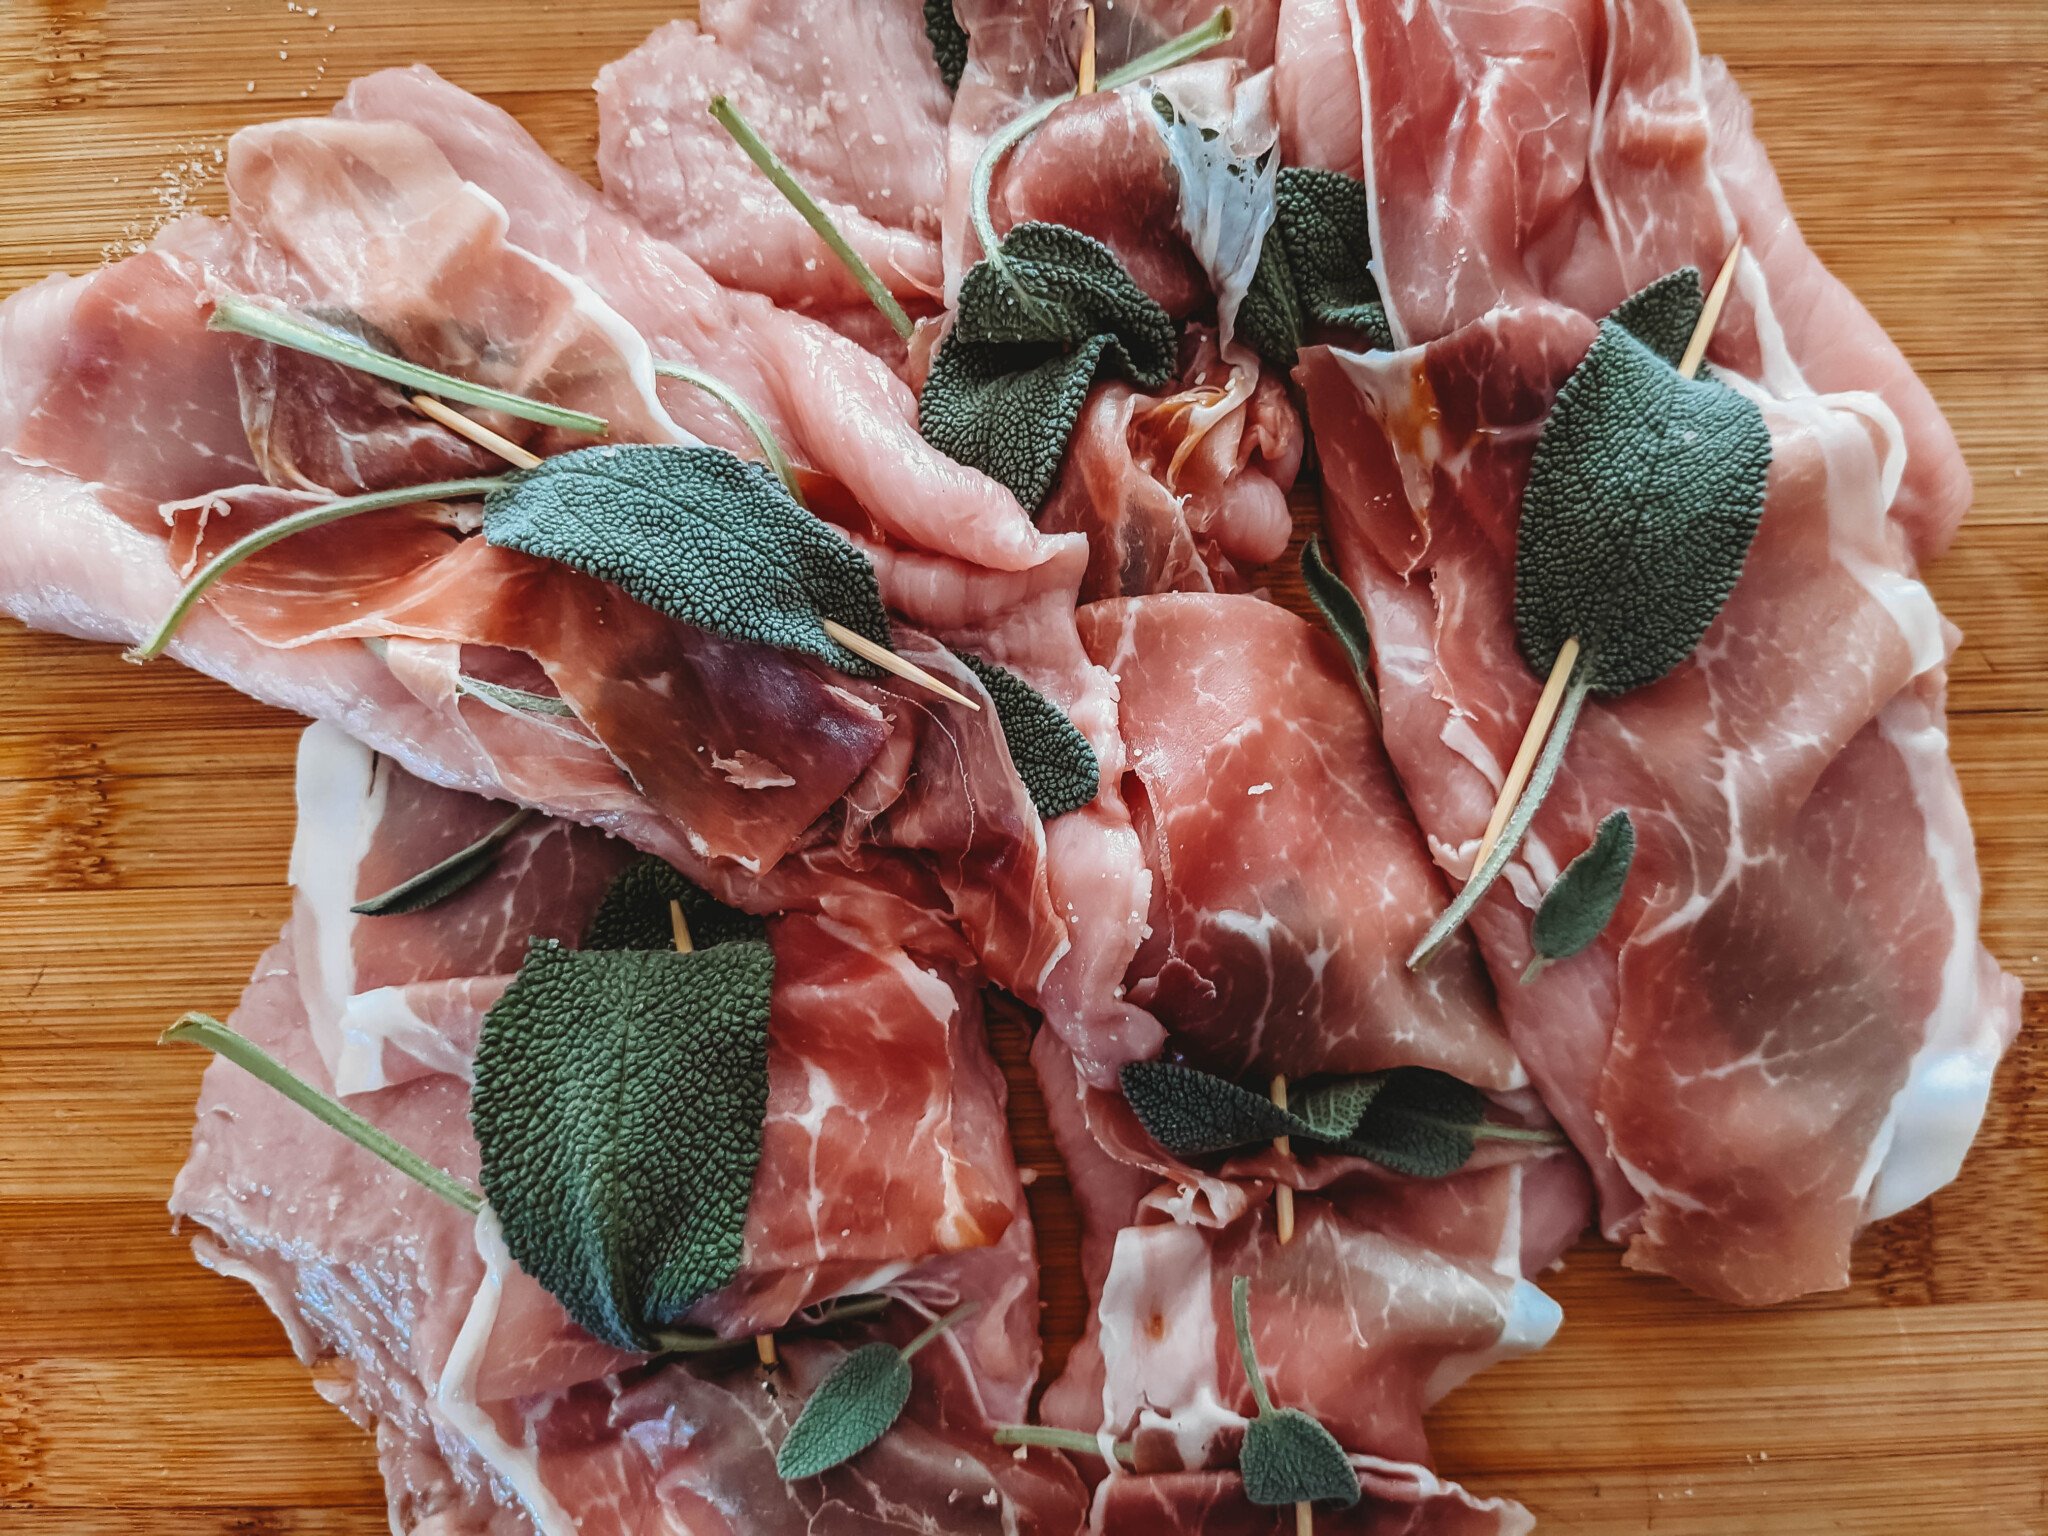 veal prepped for saltimobcca, lined with prosciutto and sage affixed with a toothpicks